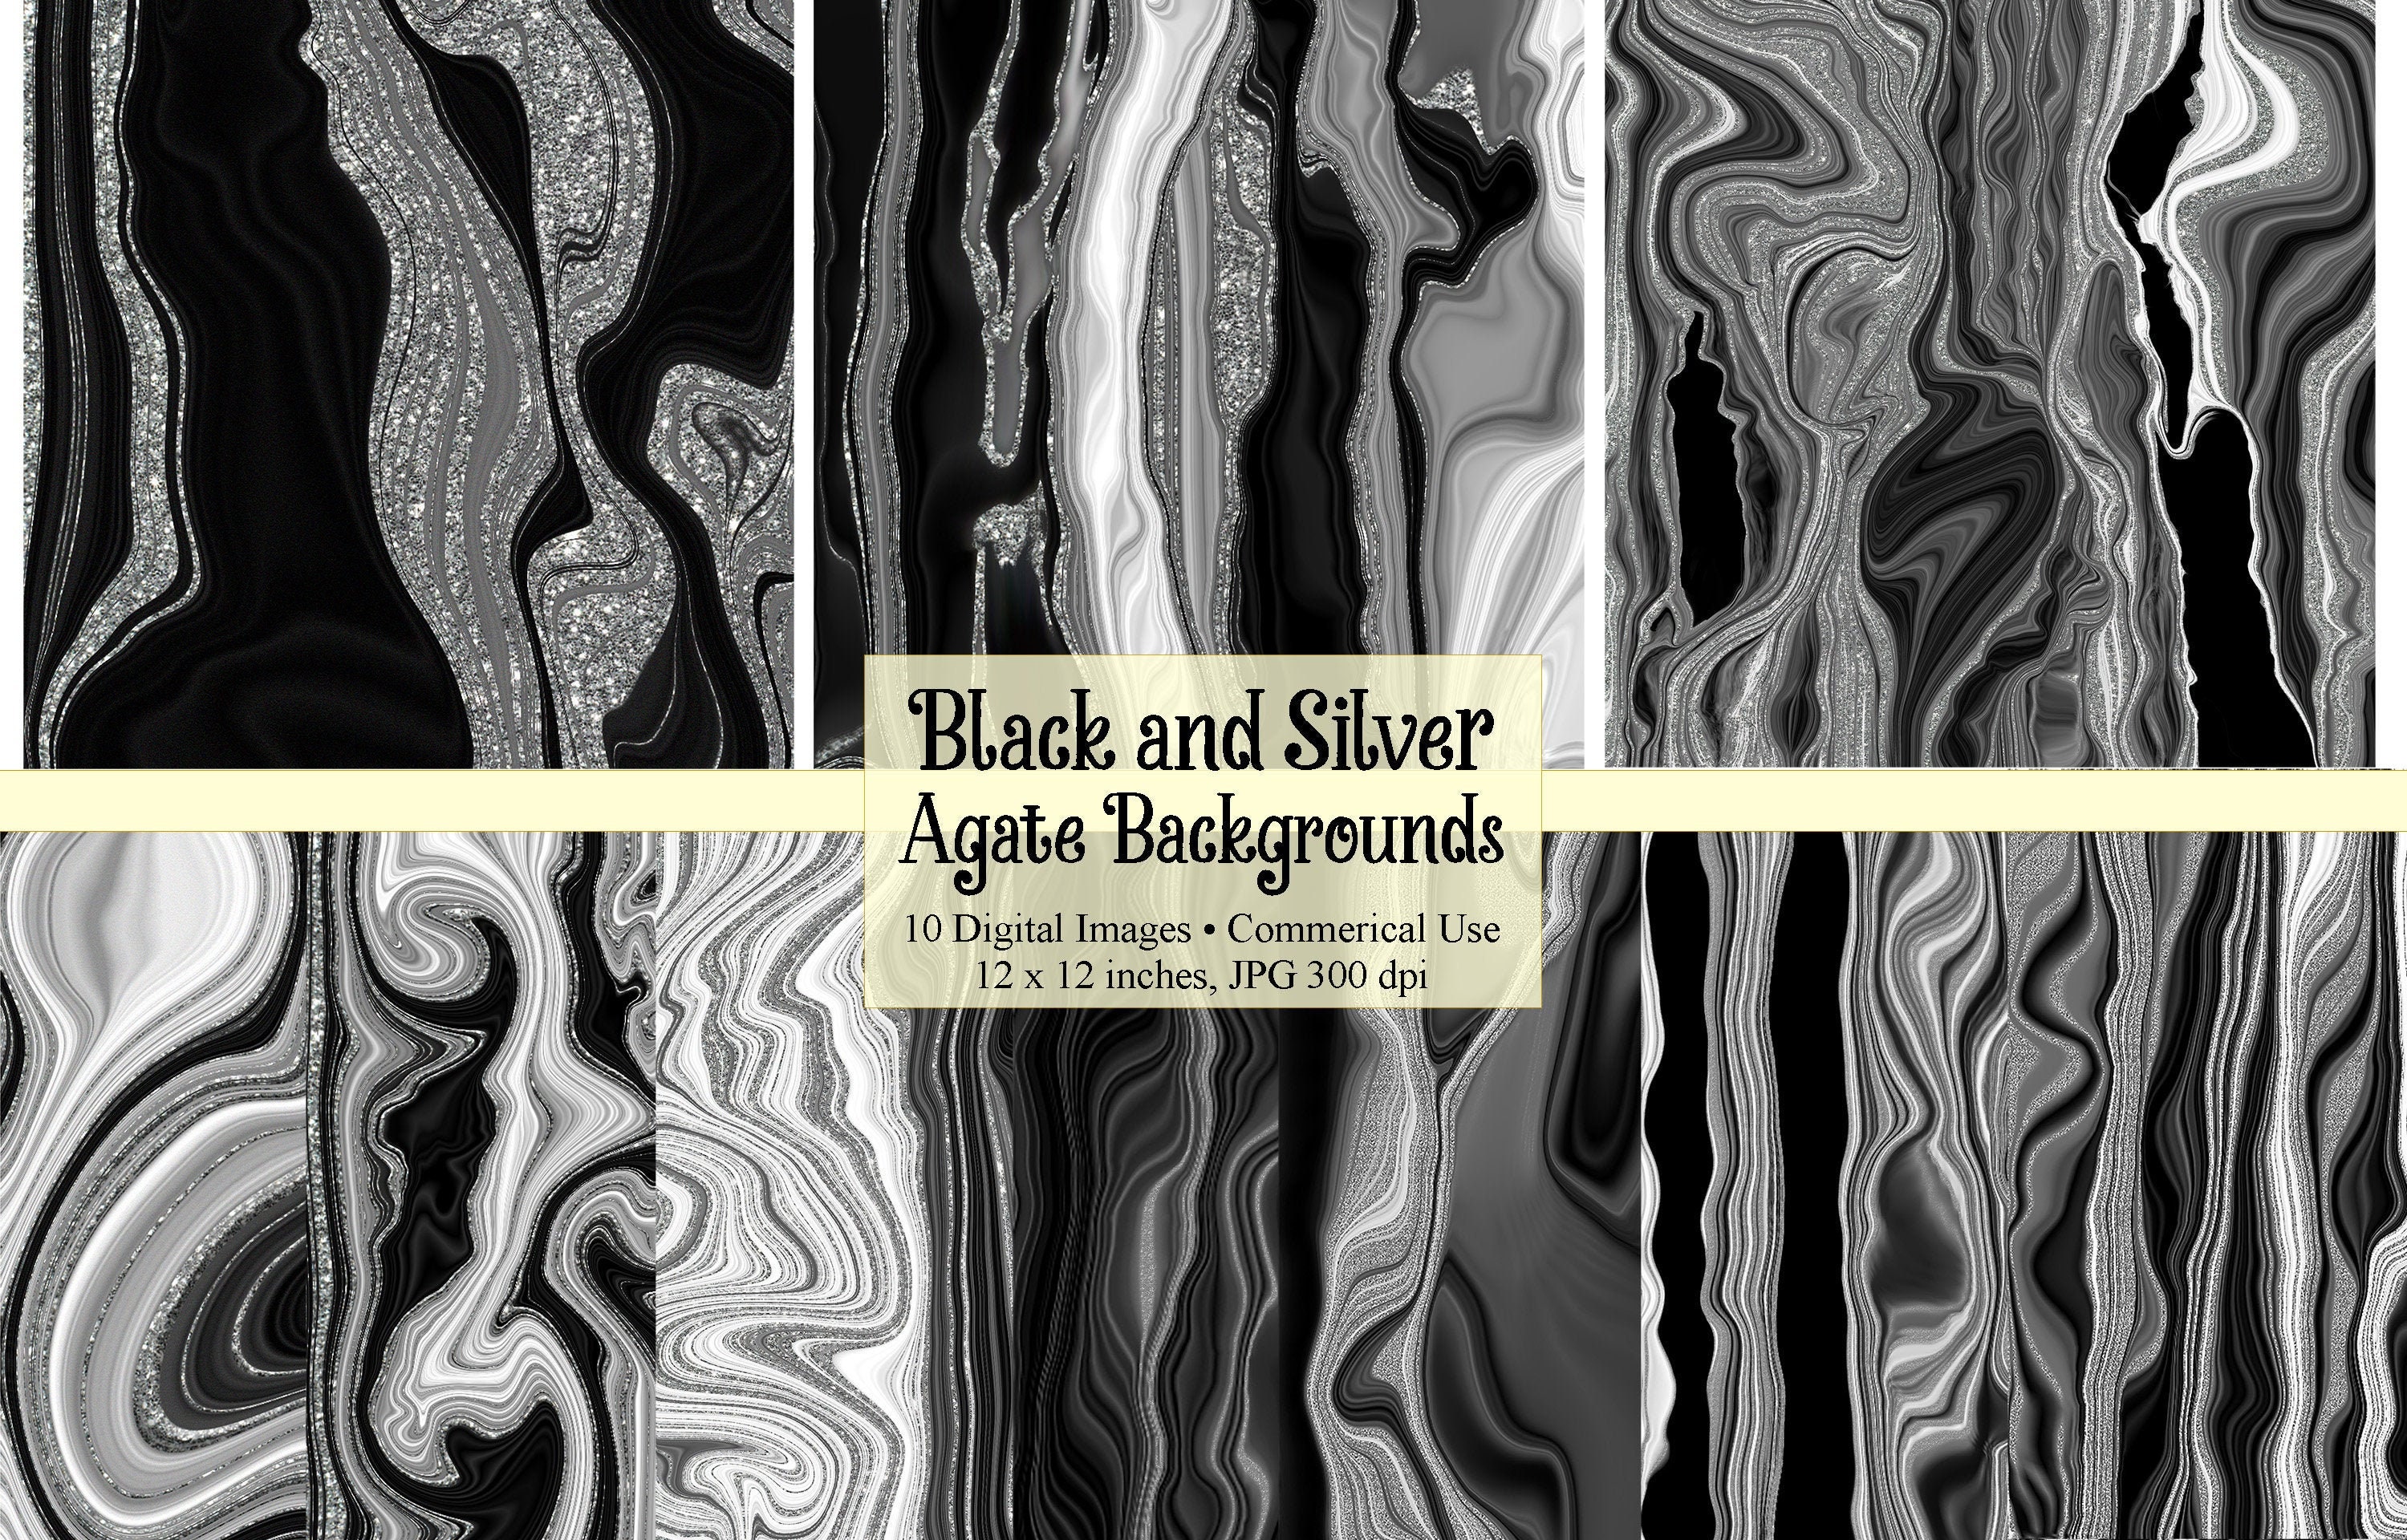 Black and Silver Party Decorations Clip Art With Frames and Banners for  Birthdays Graduation or Birthdays Instant Download Commercial Use 